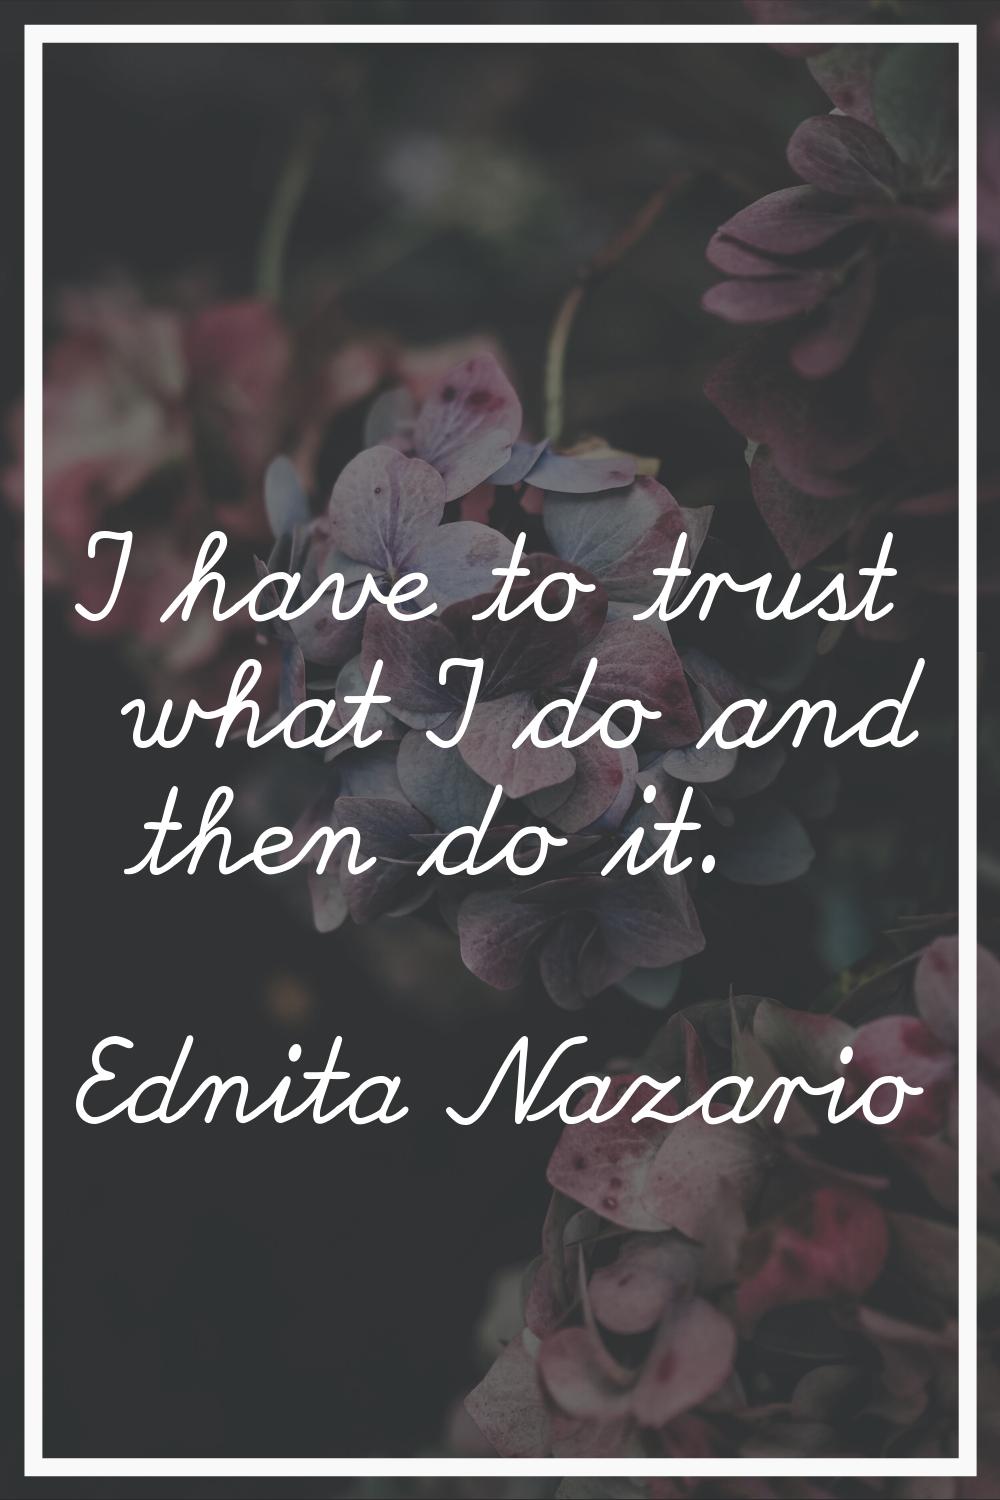 I have to trust what I do and then do it.